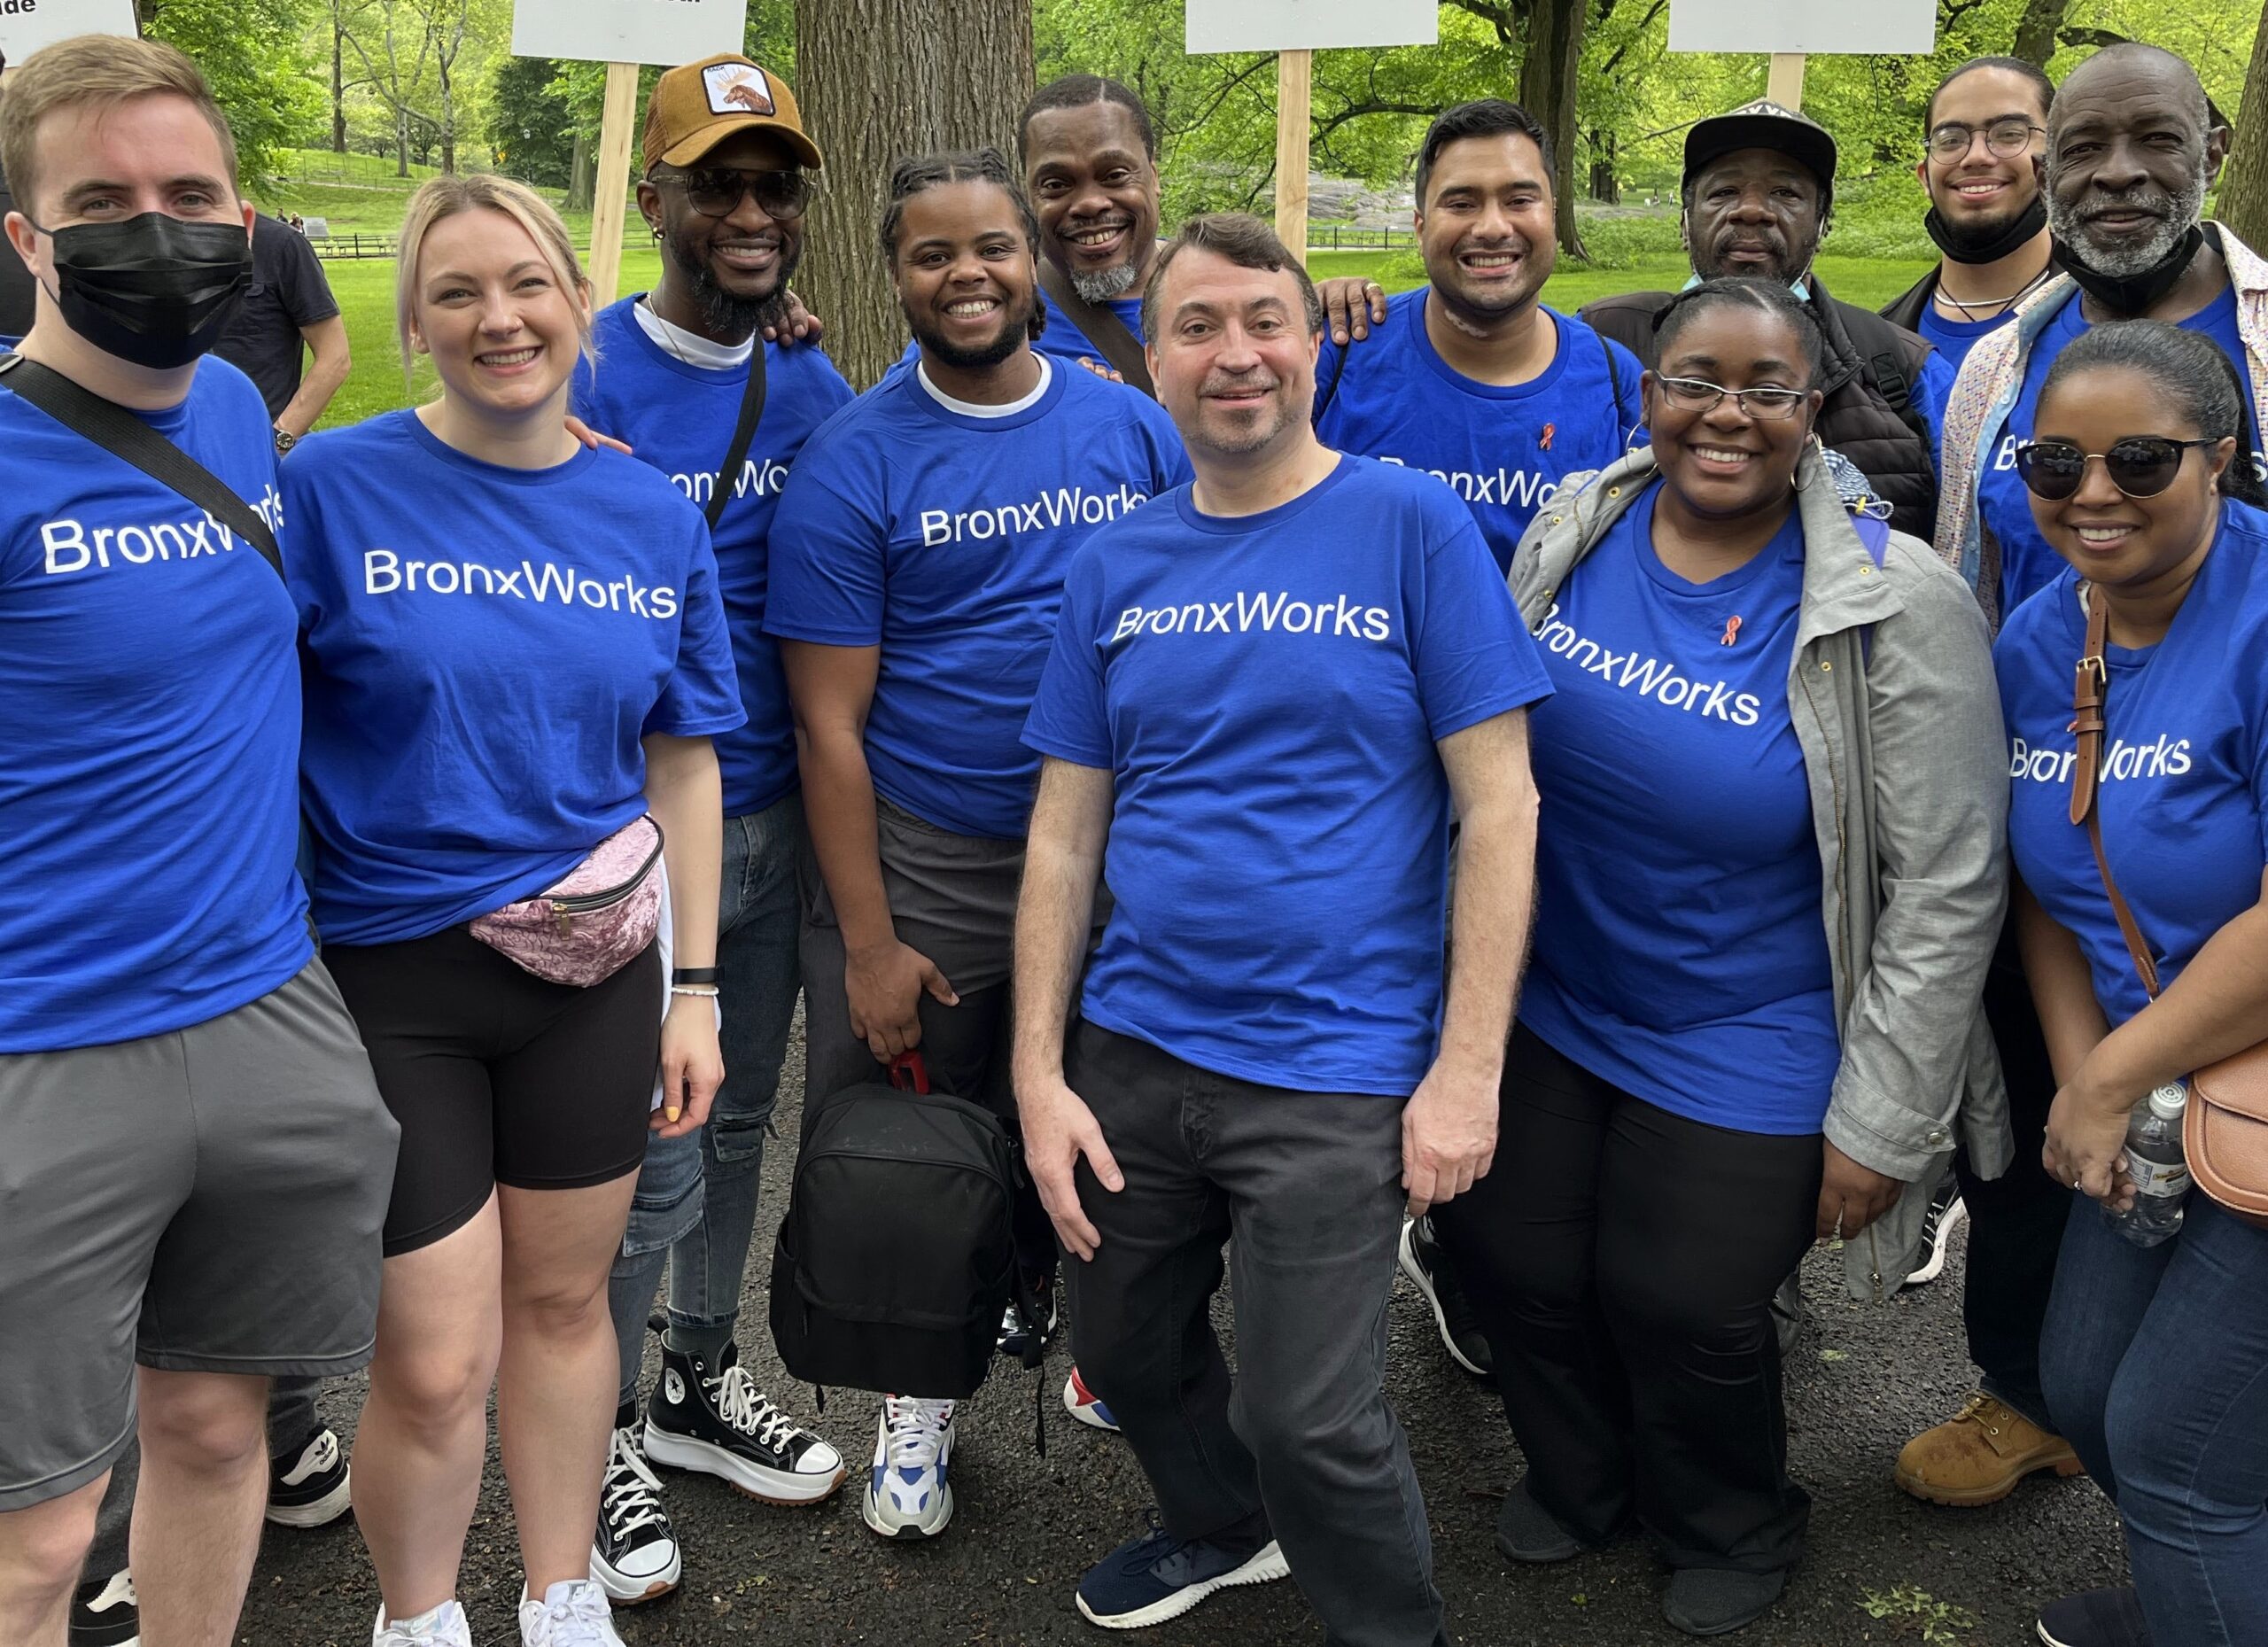 Multiple people stand together wearing BronxWorks shirts